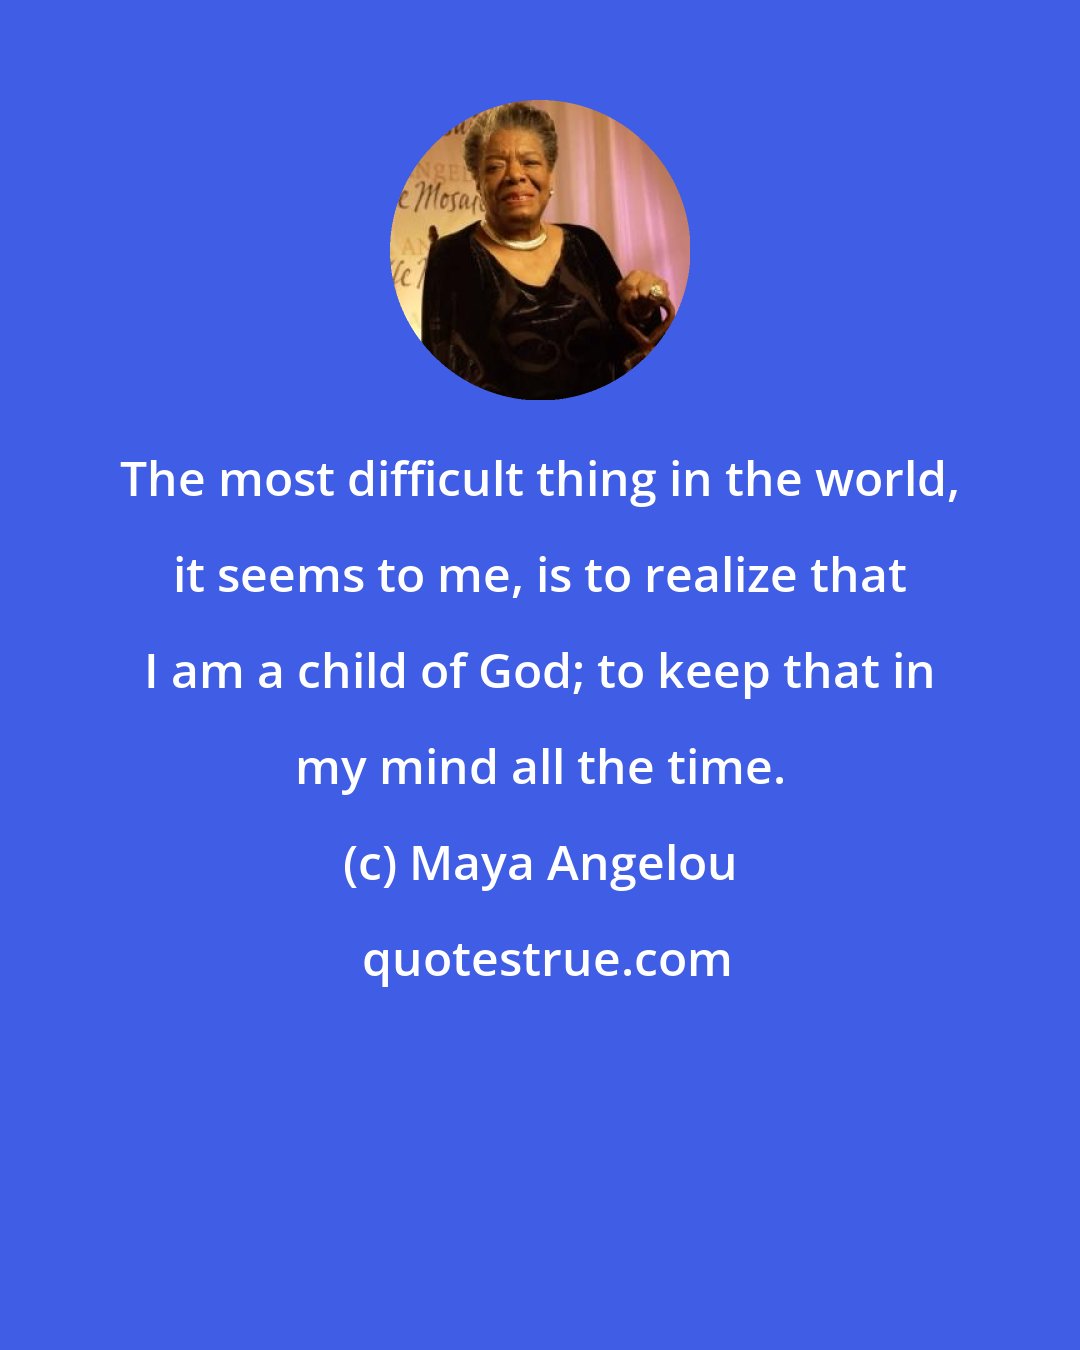 Maya Angelou: The most difficult thing in the world, it seems to me, is to realize that I am a child of God; to keep that in my mind all the time.